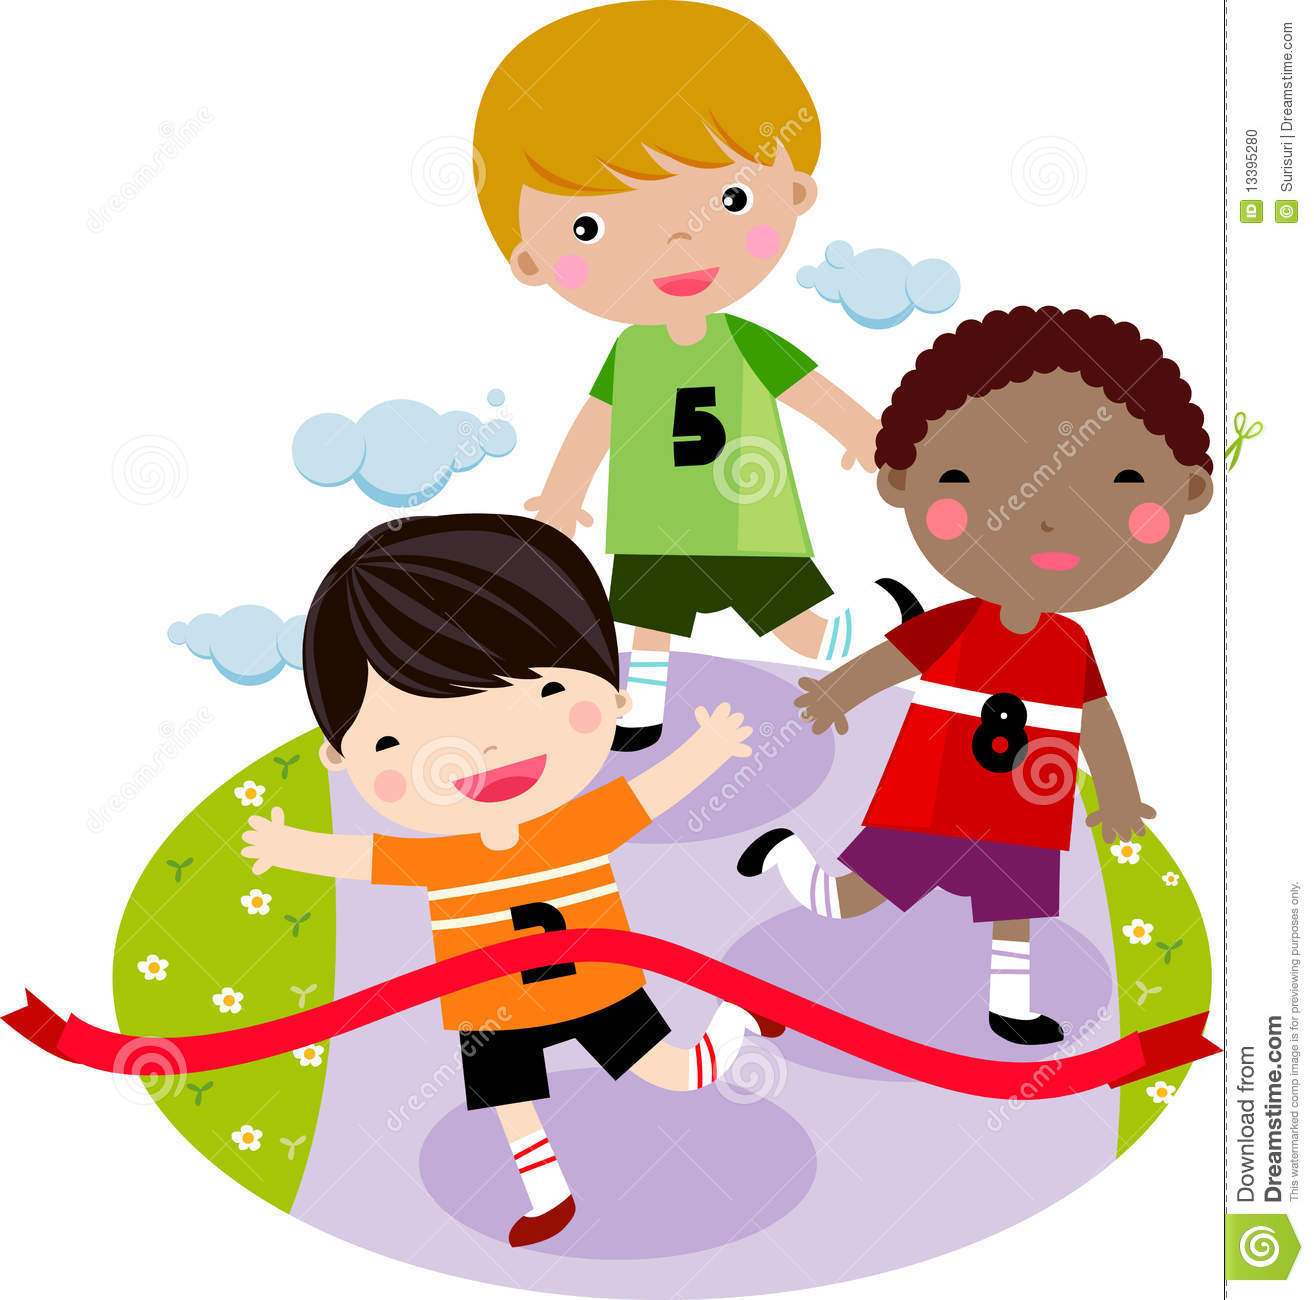 More Similar Stock Images Of   Children Running Together In A Race